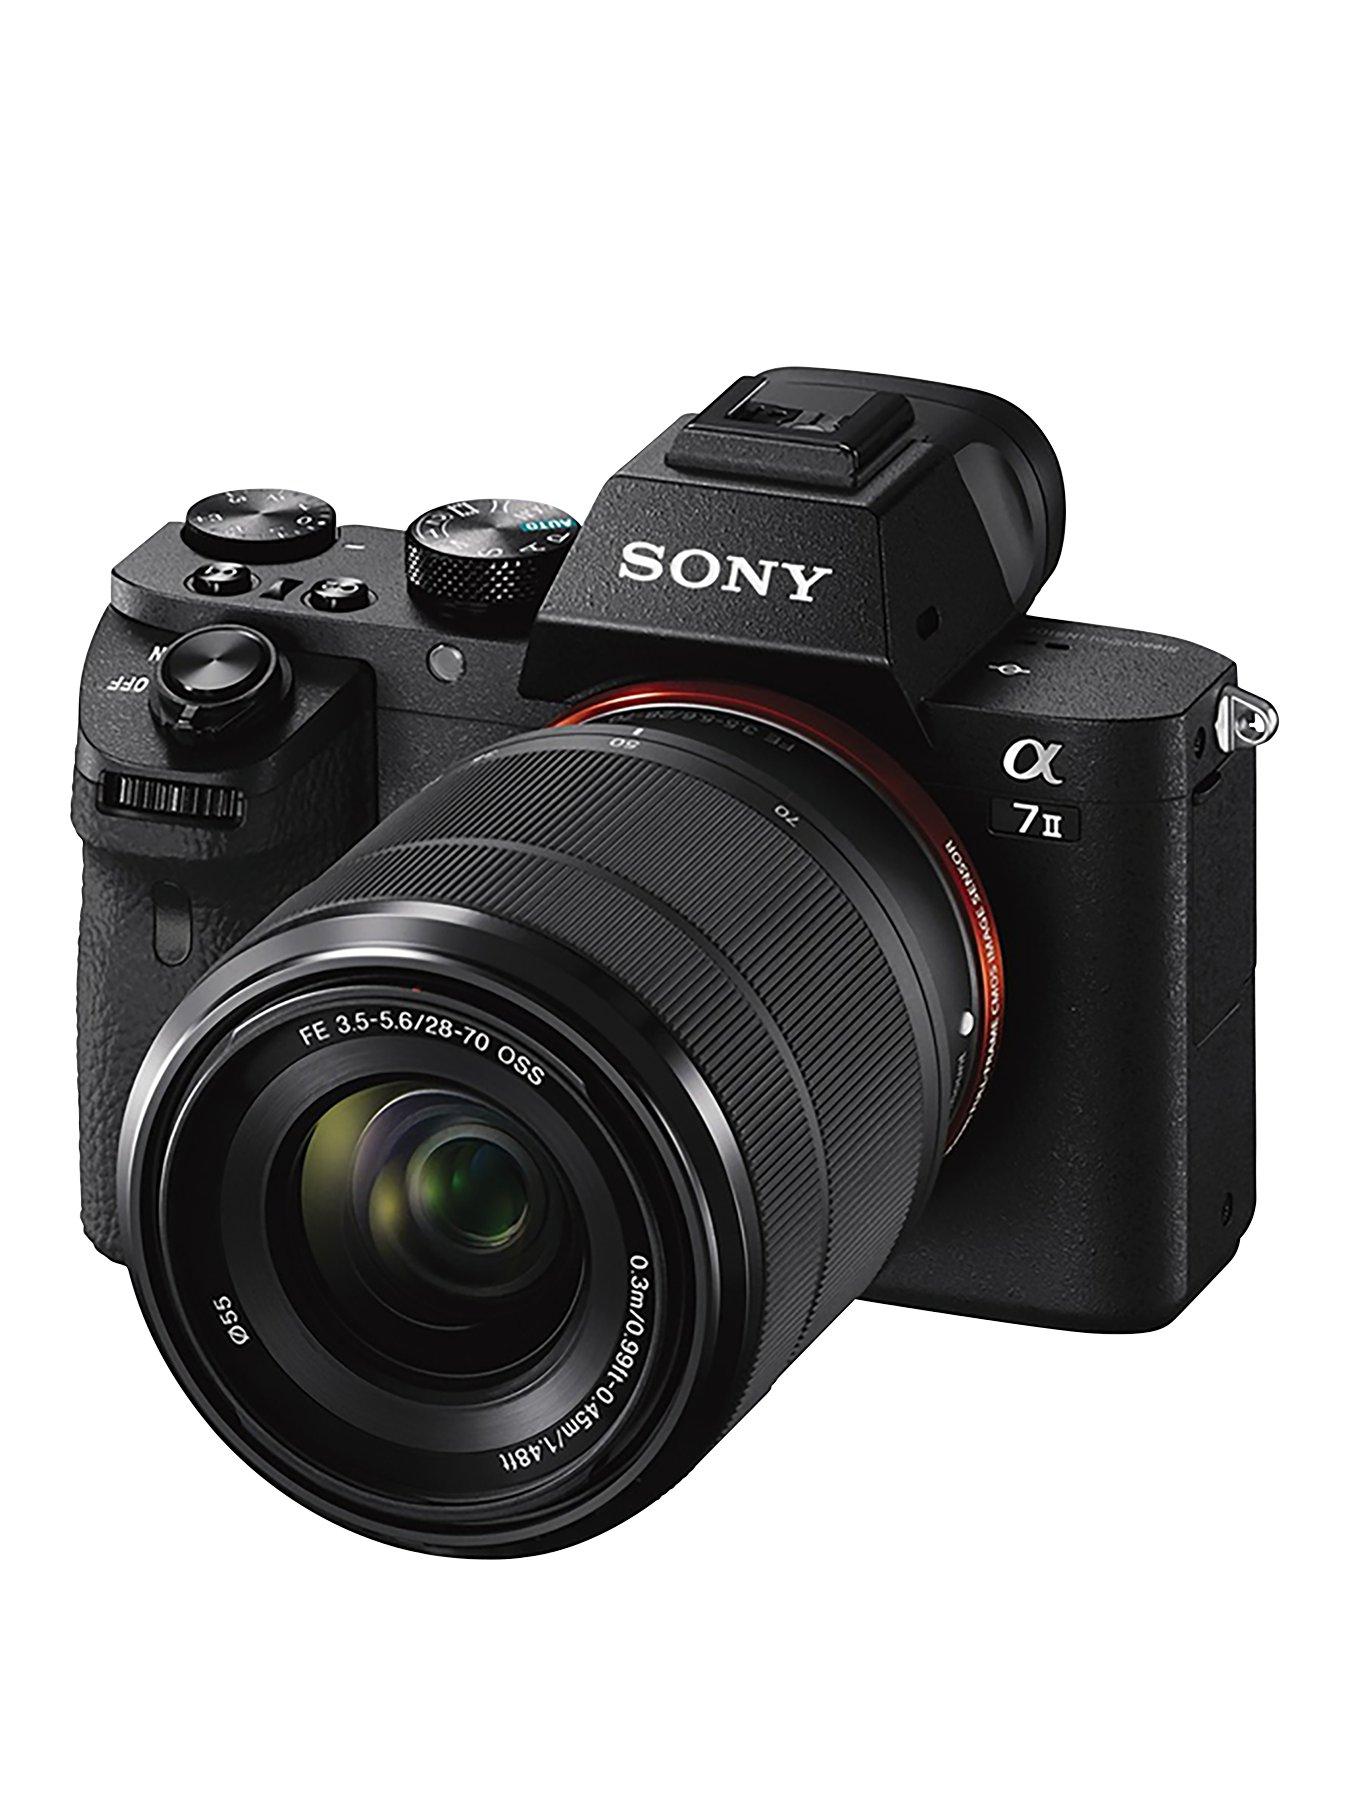 Sony A7 Mkii Compact System 24.3 Megapixel Camera With Full Frame Sensor – 28-70Mm Lens Bundle